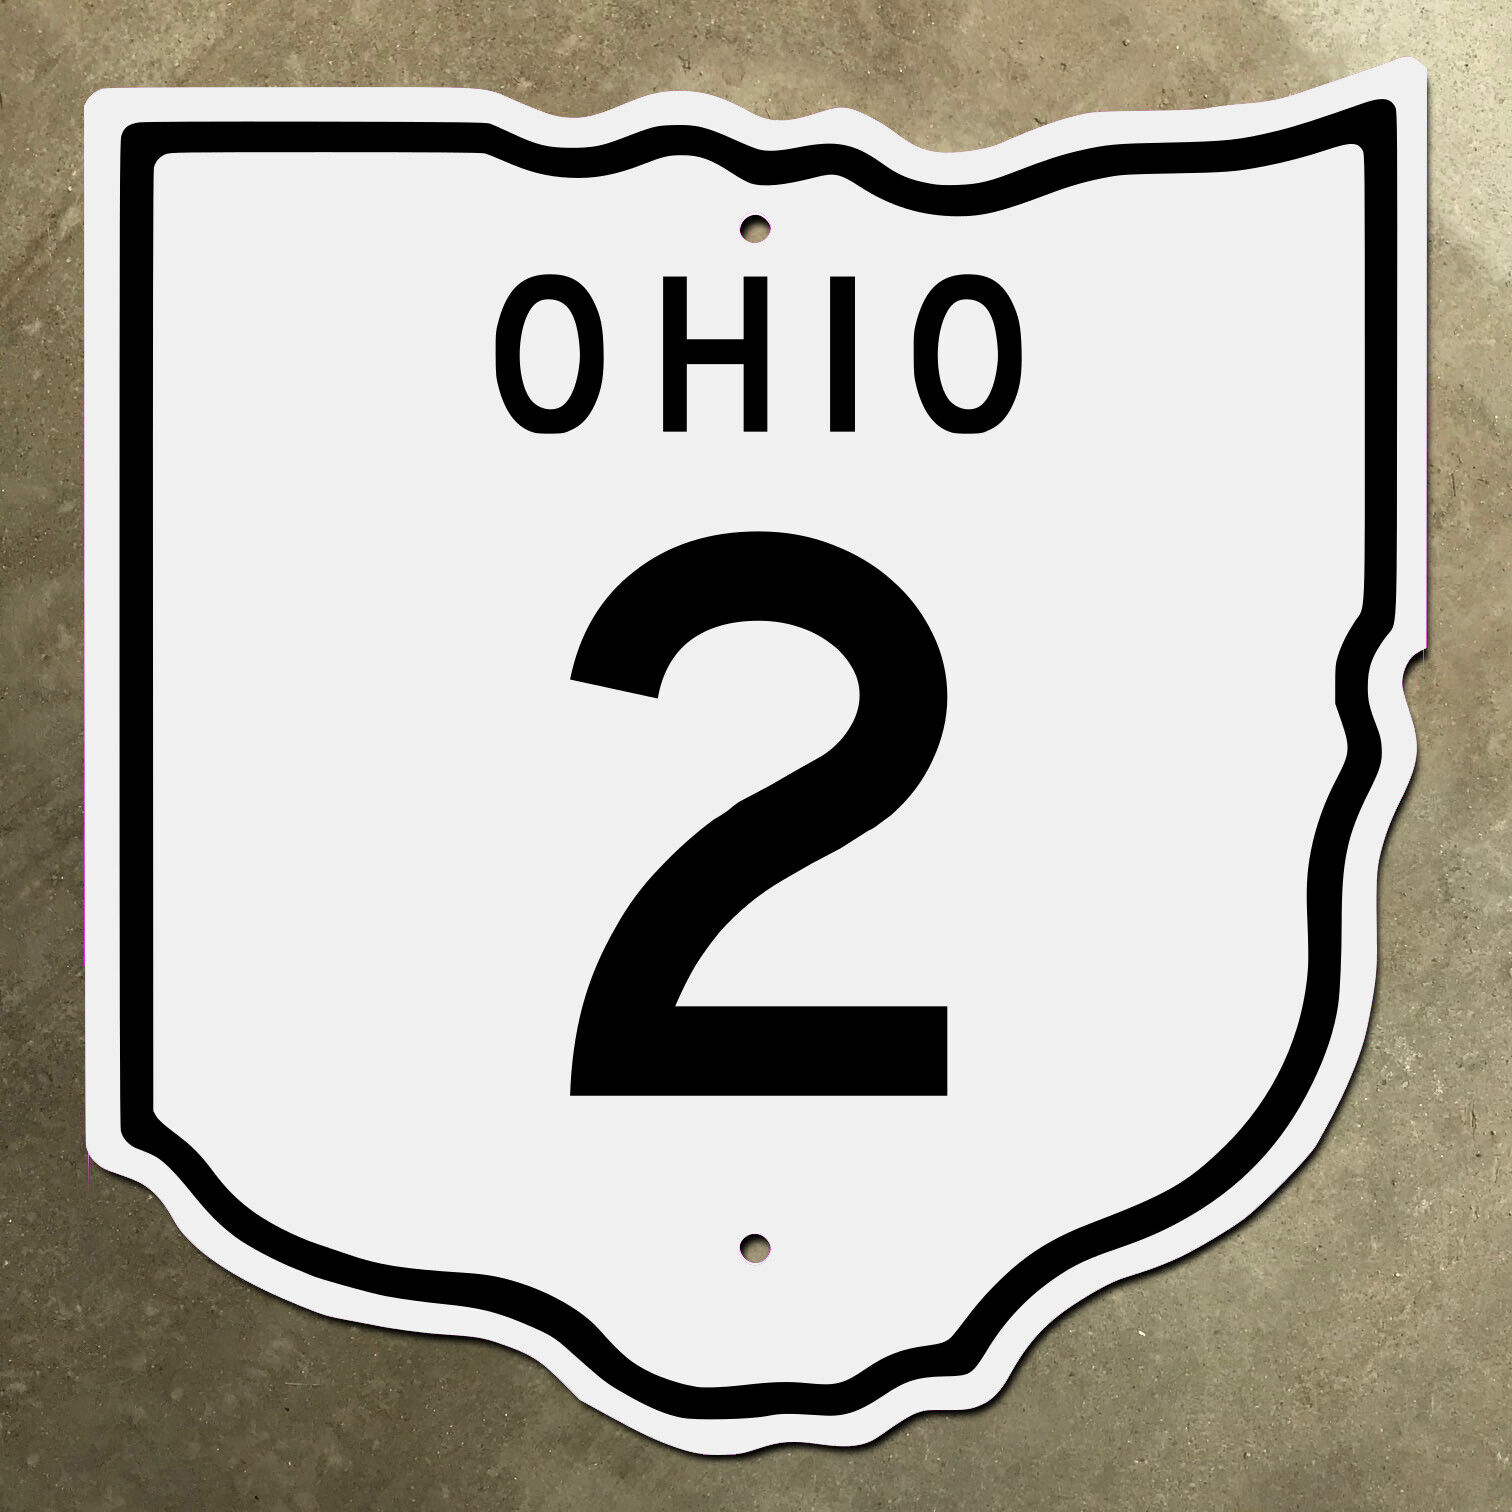 Ohio state route 2 Cleveland Lakeland Freeway highway marker road sign 12\